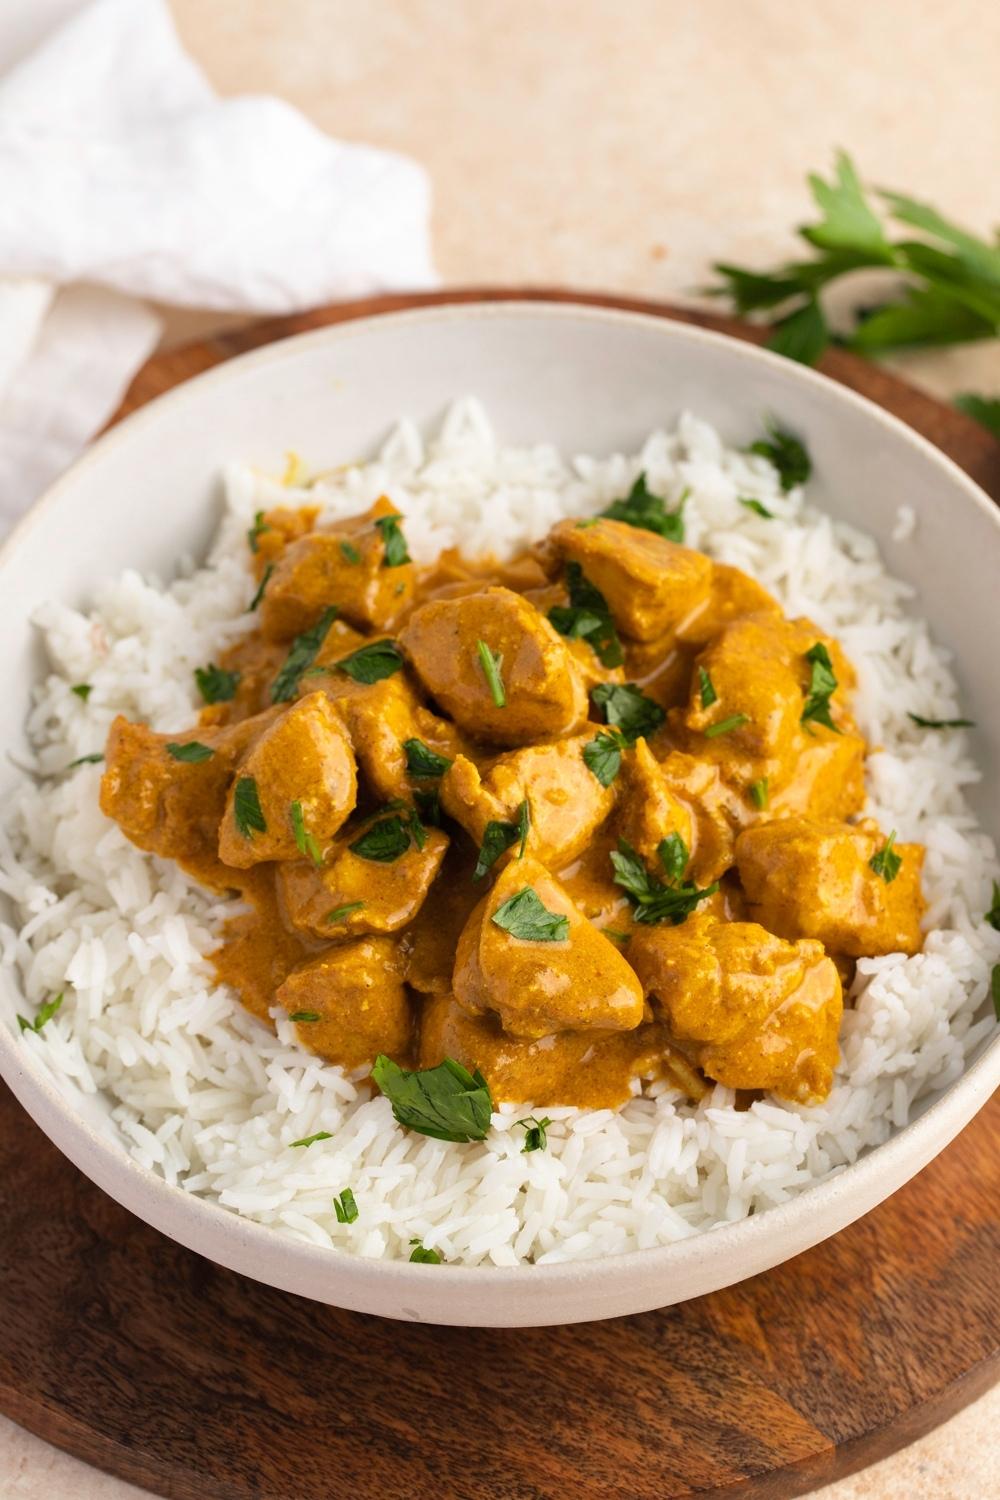 Homemade Indian Chicken Curry with Herbs and Rice in a Bowl